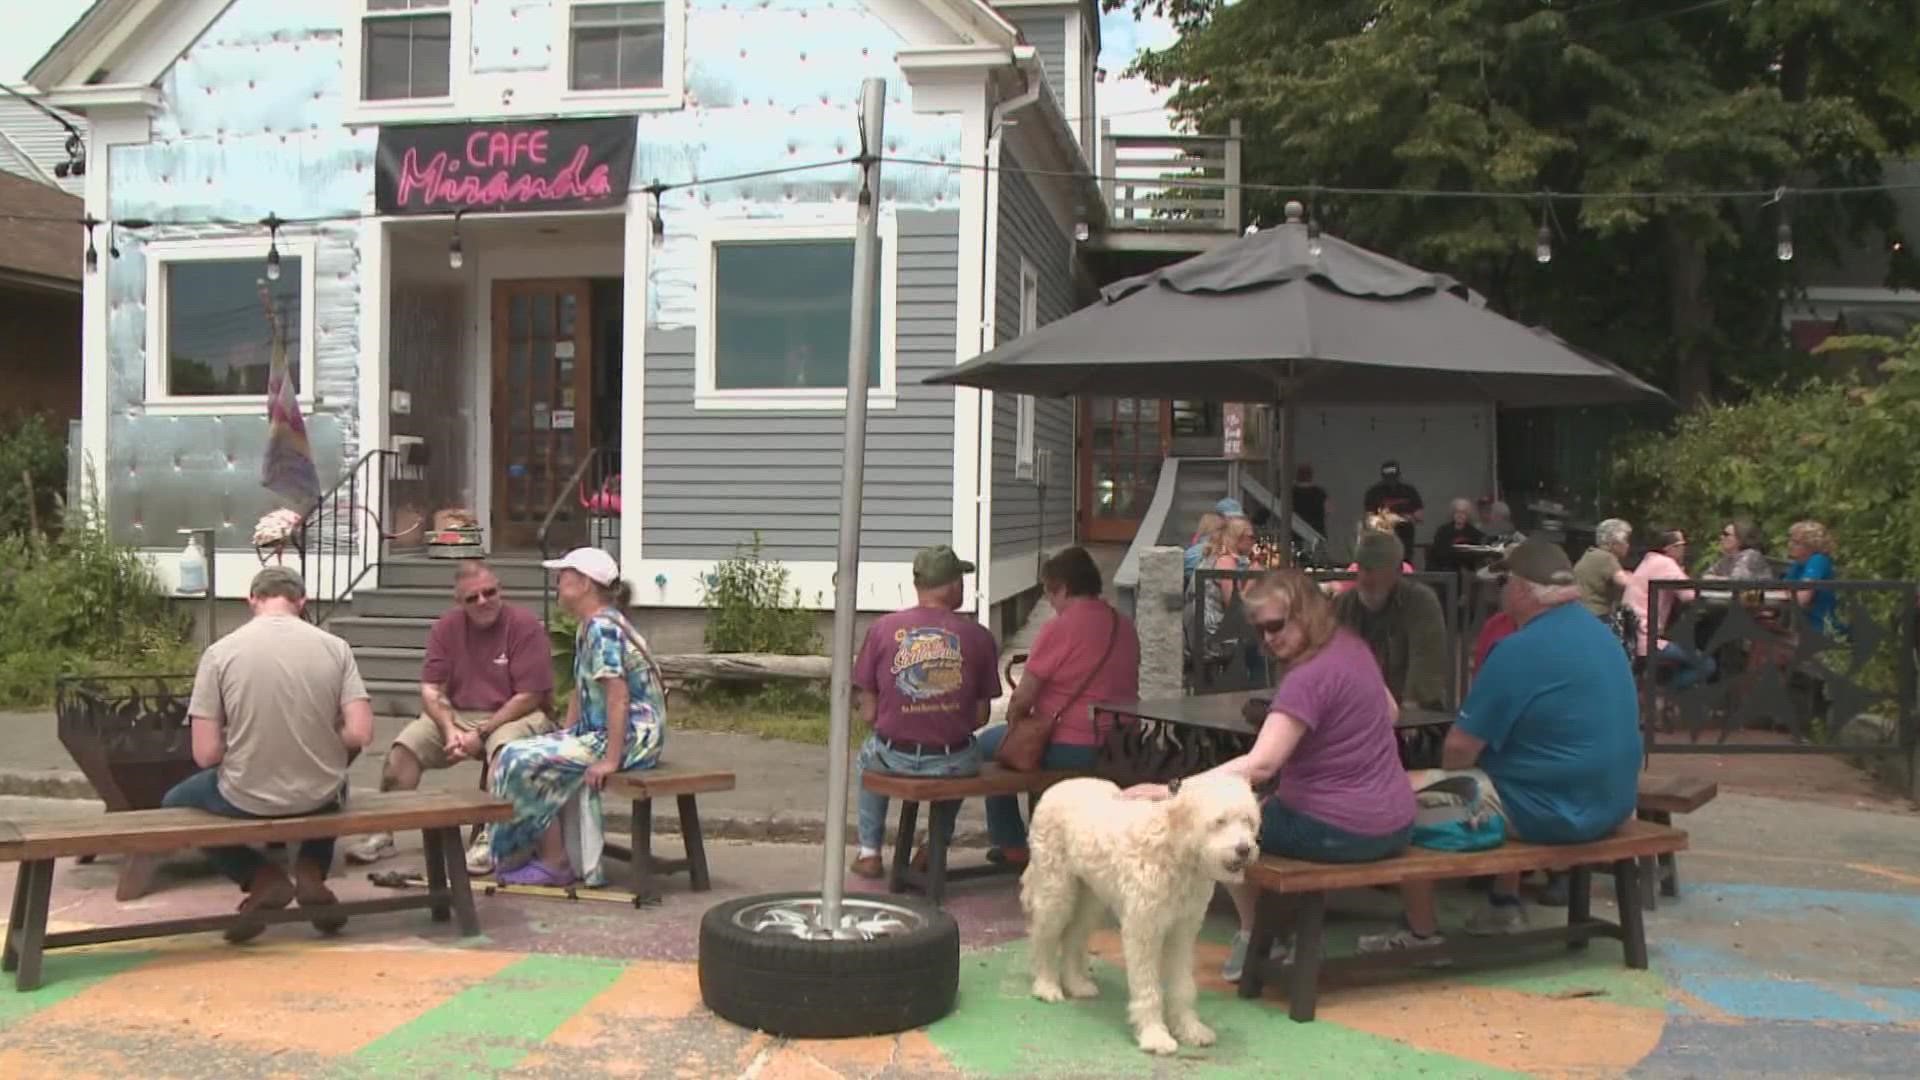 Cafe Miranda has become one of Rockland’s most popular eateries, with a loyal following of customers from near and far.